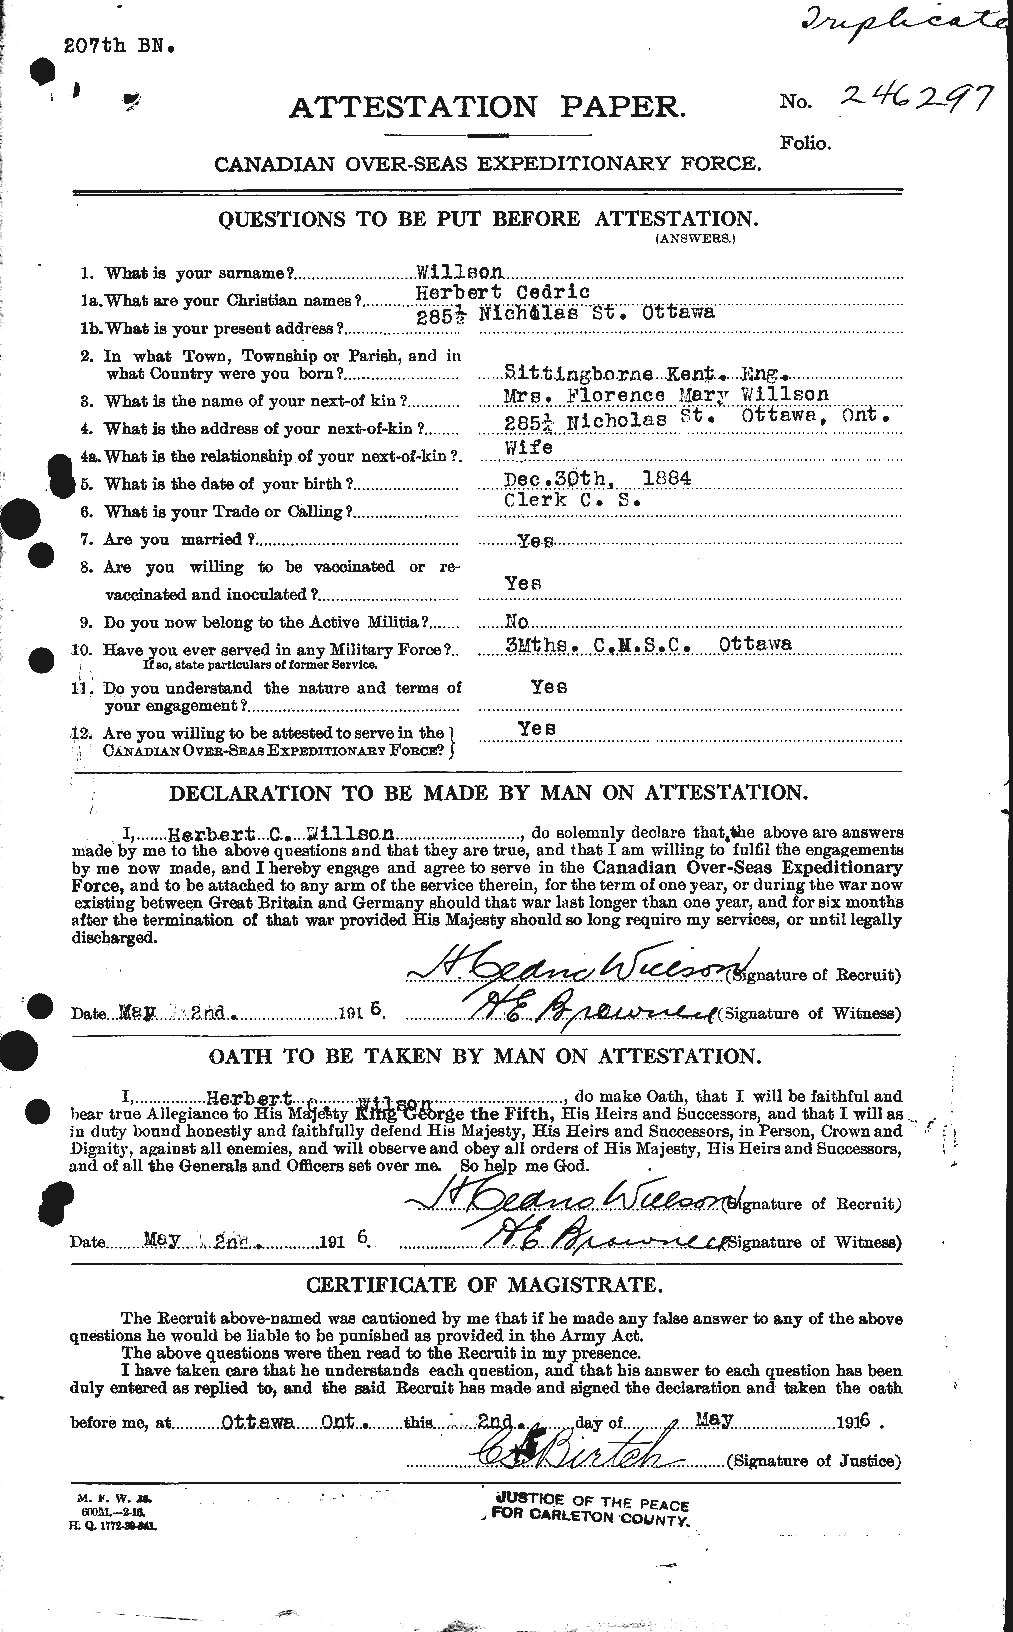 Personnel Records of the First World War - CEF 676978a